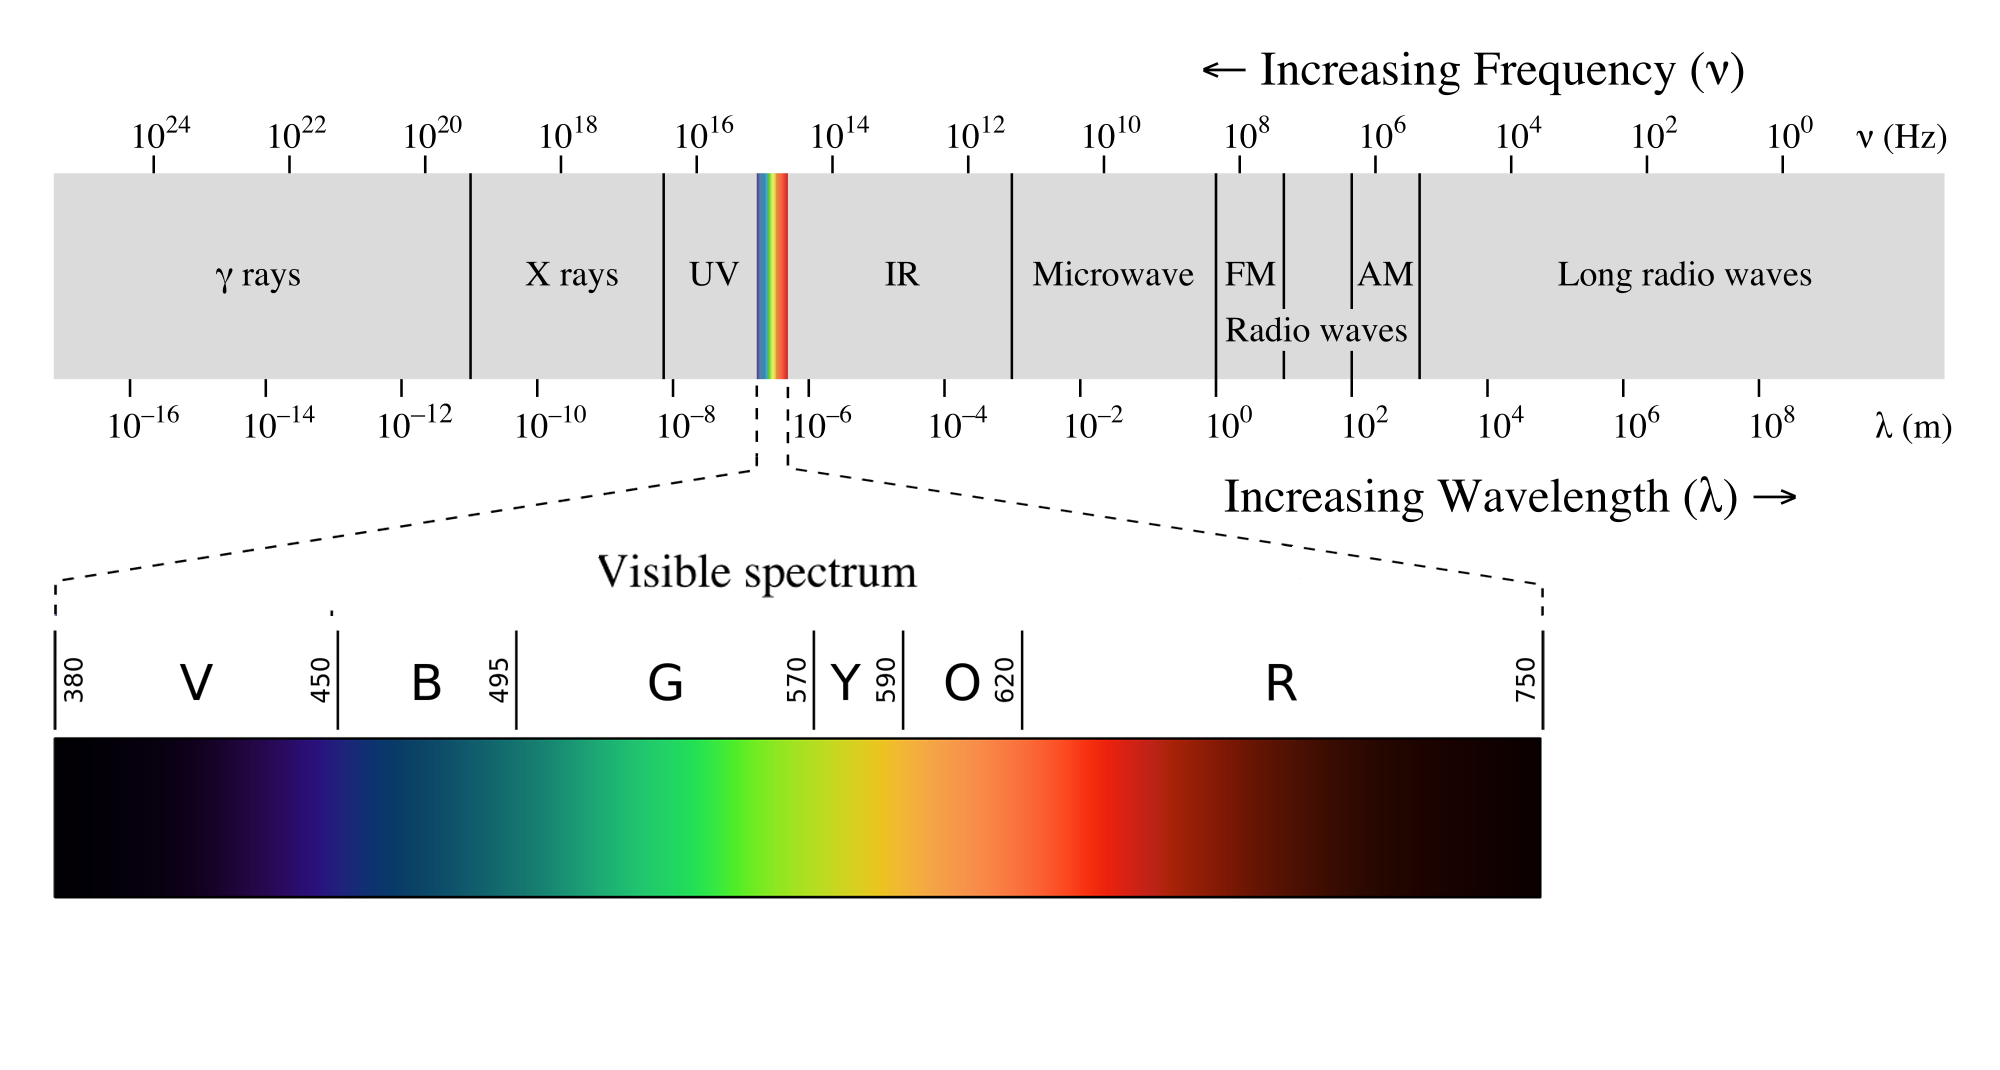 The electromagnetic spectrum includes all possible energies of light, from the highest energies (high frequency, low wavelength) at the left to the lowest energies (low frequency, high wavelength) at the right. Only the narrow range of energies represented by the colored lines is visible to us. 